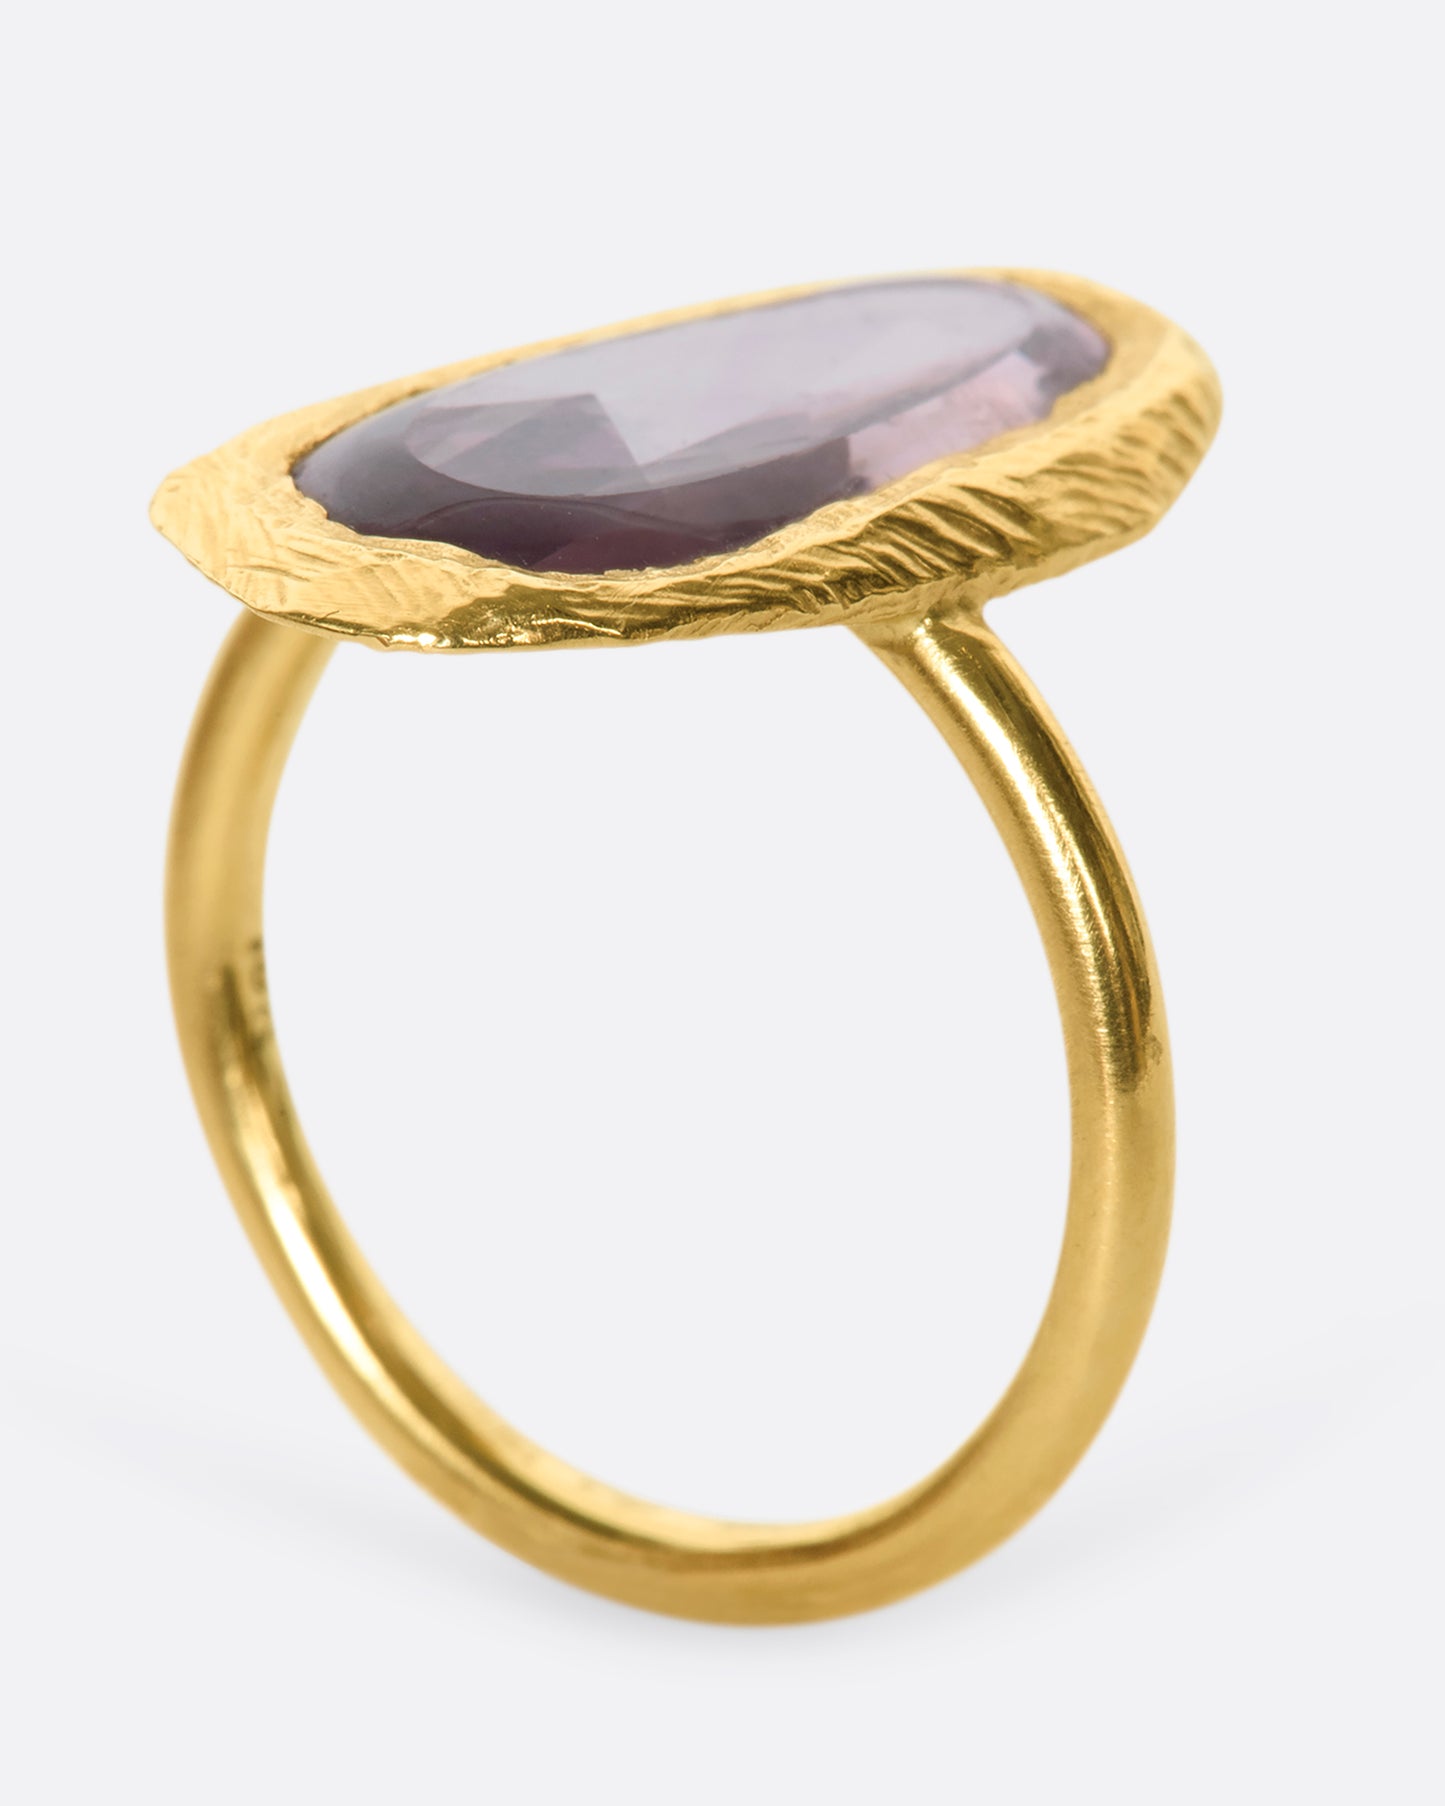 This truly unique freeform, rose-cut purple sapphire is nestled in a hand-carved 18k gold bezel setting